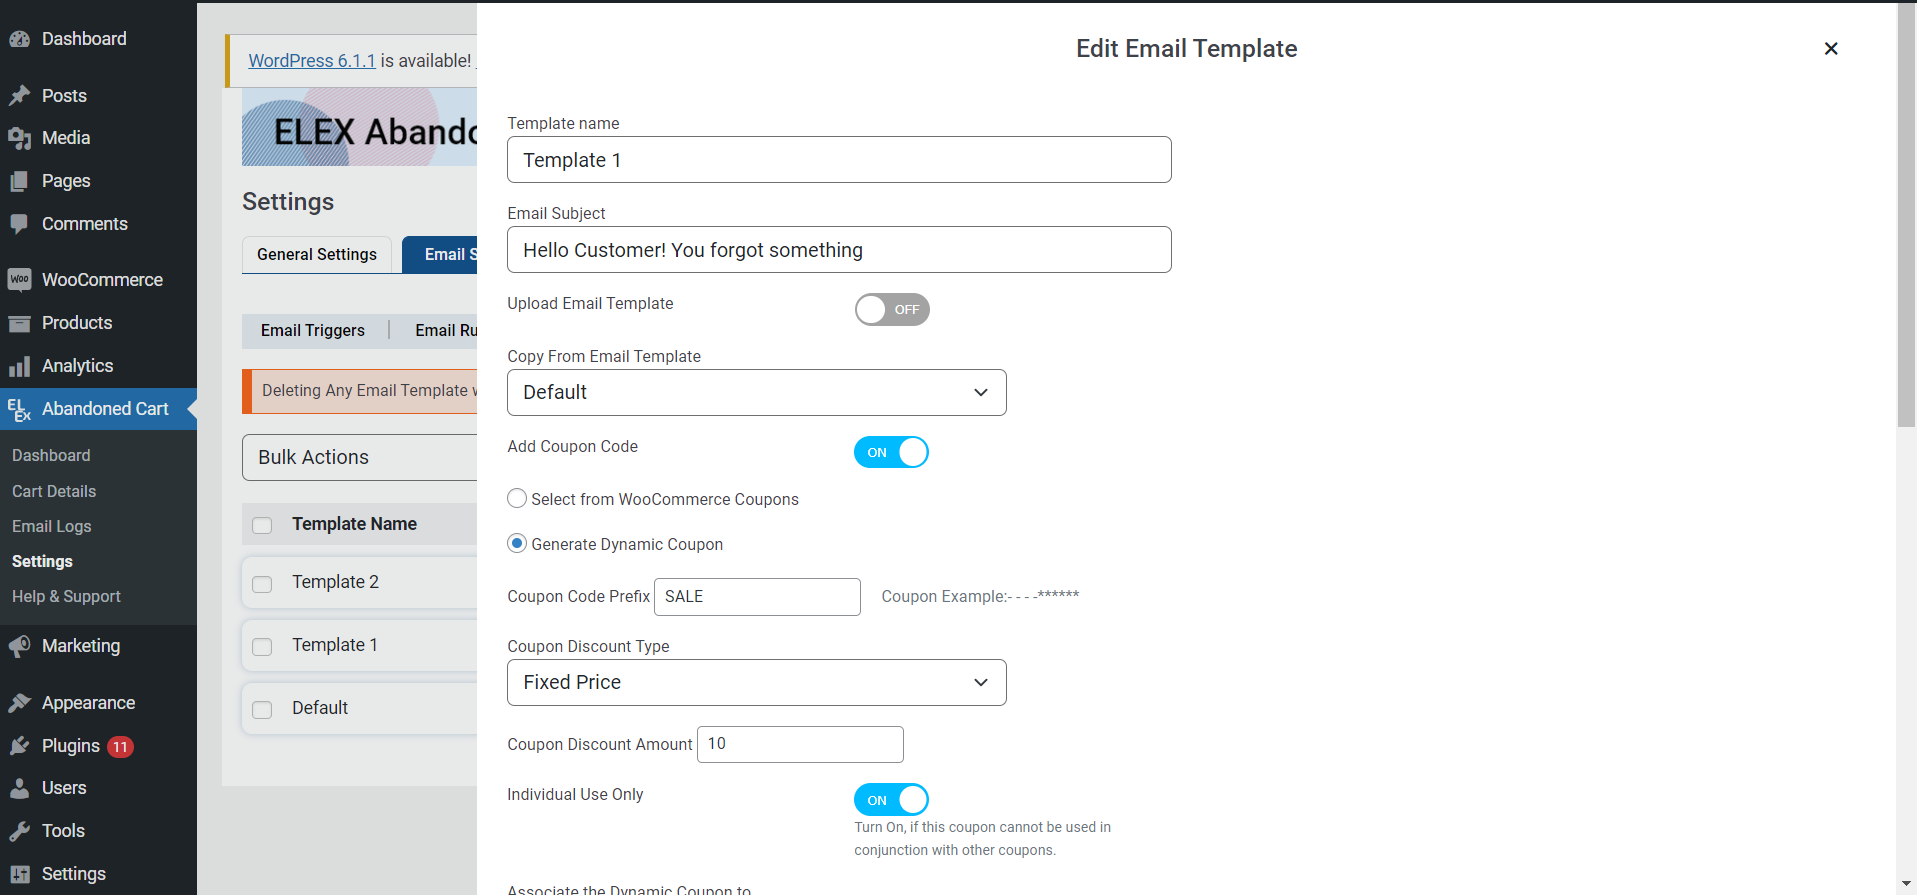 Edit email template and add coupon codes